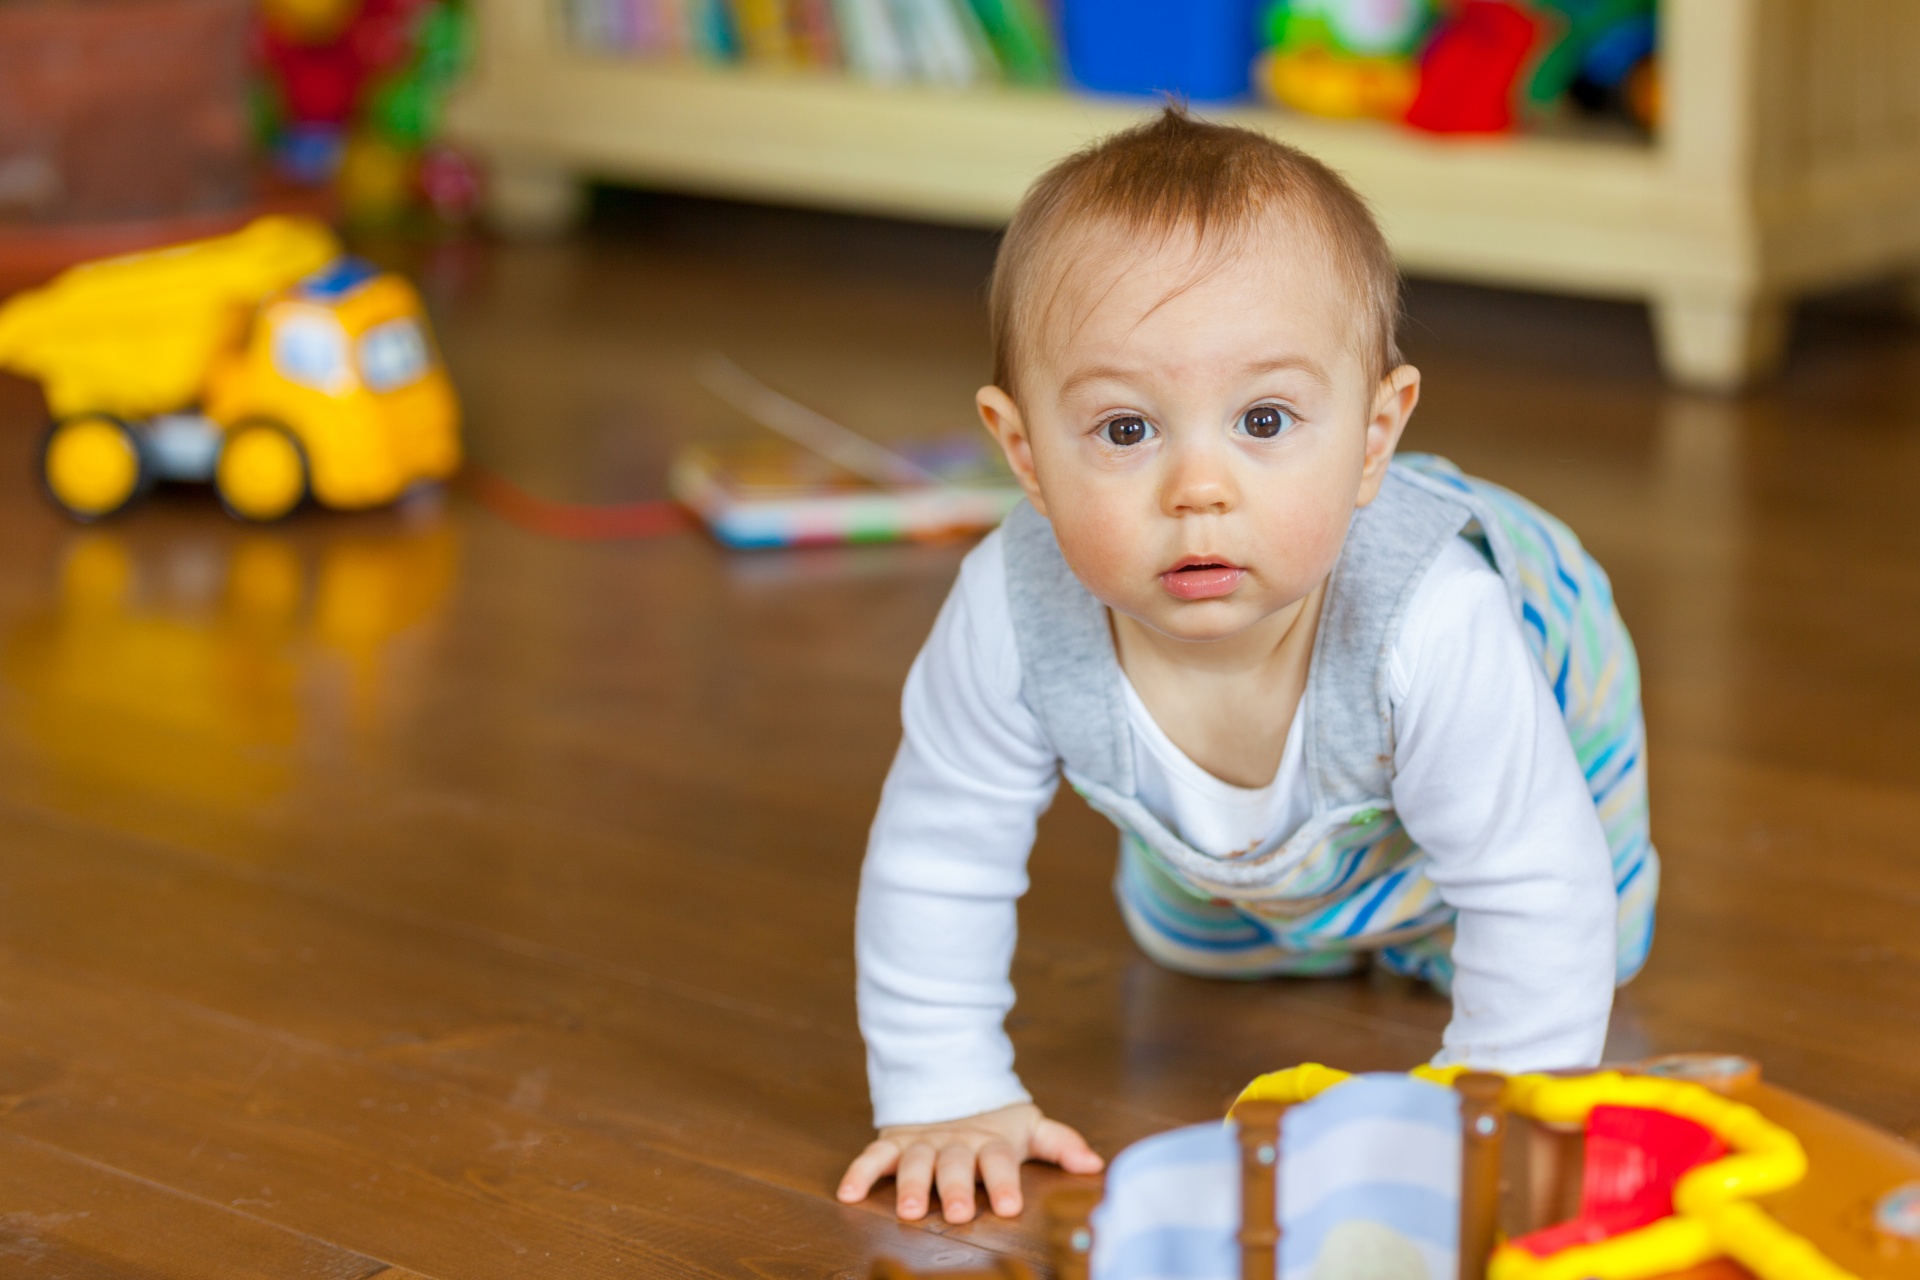 An infant crawling on the floor with toys around as done in the Strange Situation.^[[Image](https://www.publicdomainpictures.net/en/view-image.php?image=248590&picture=toddler-in-playroom) is in the public domain]